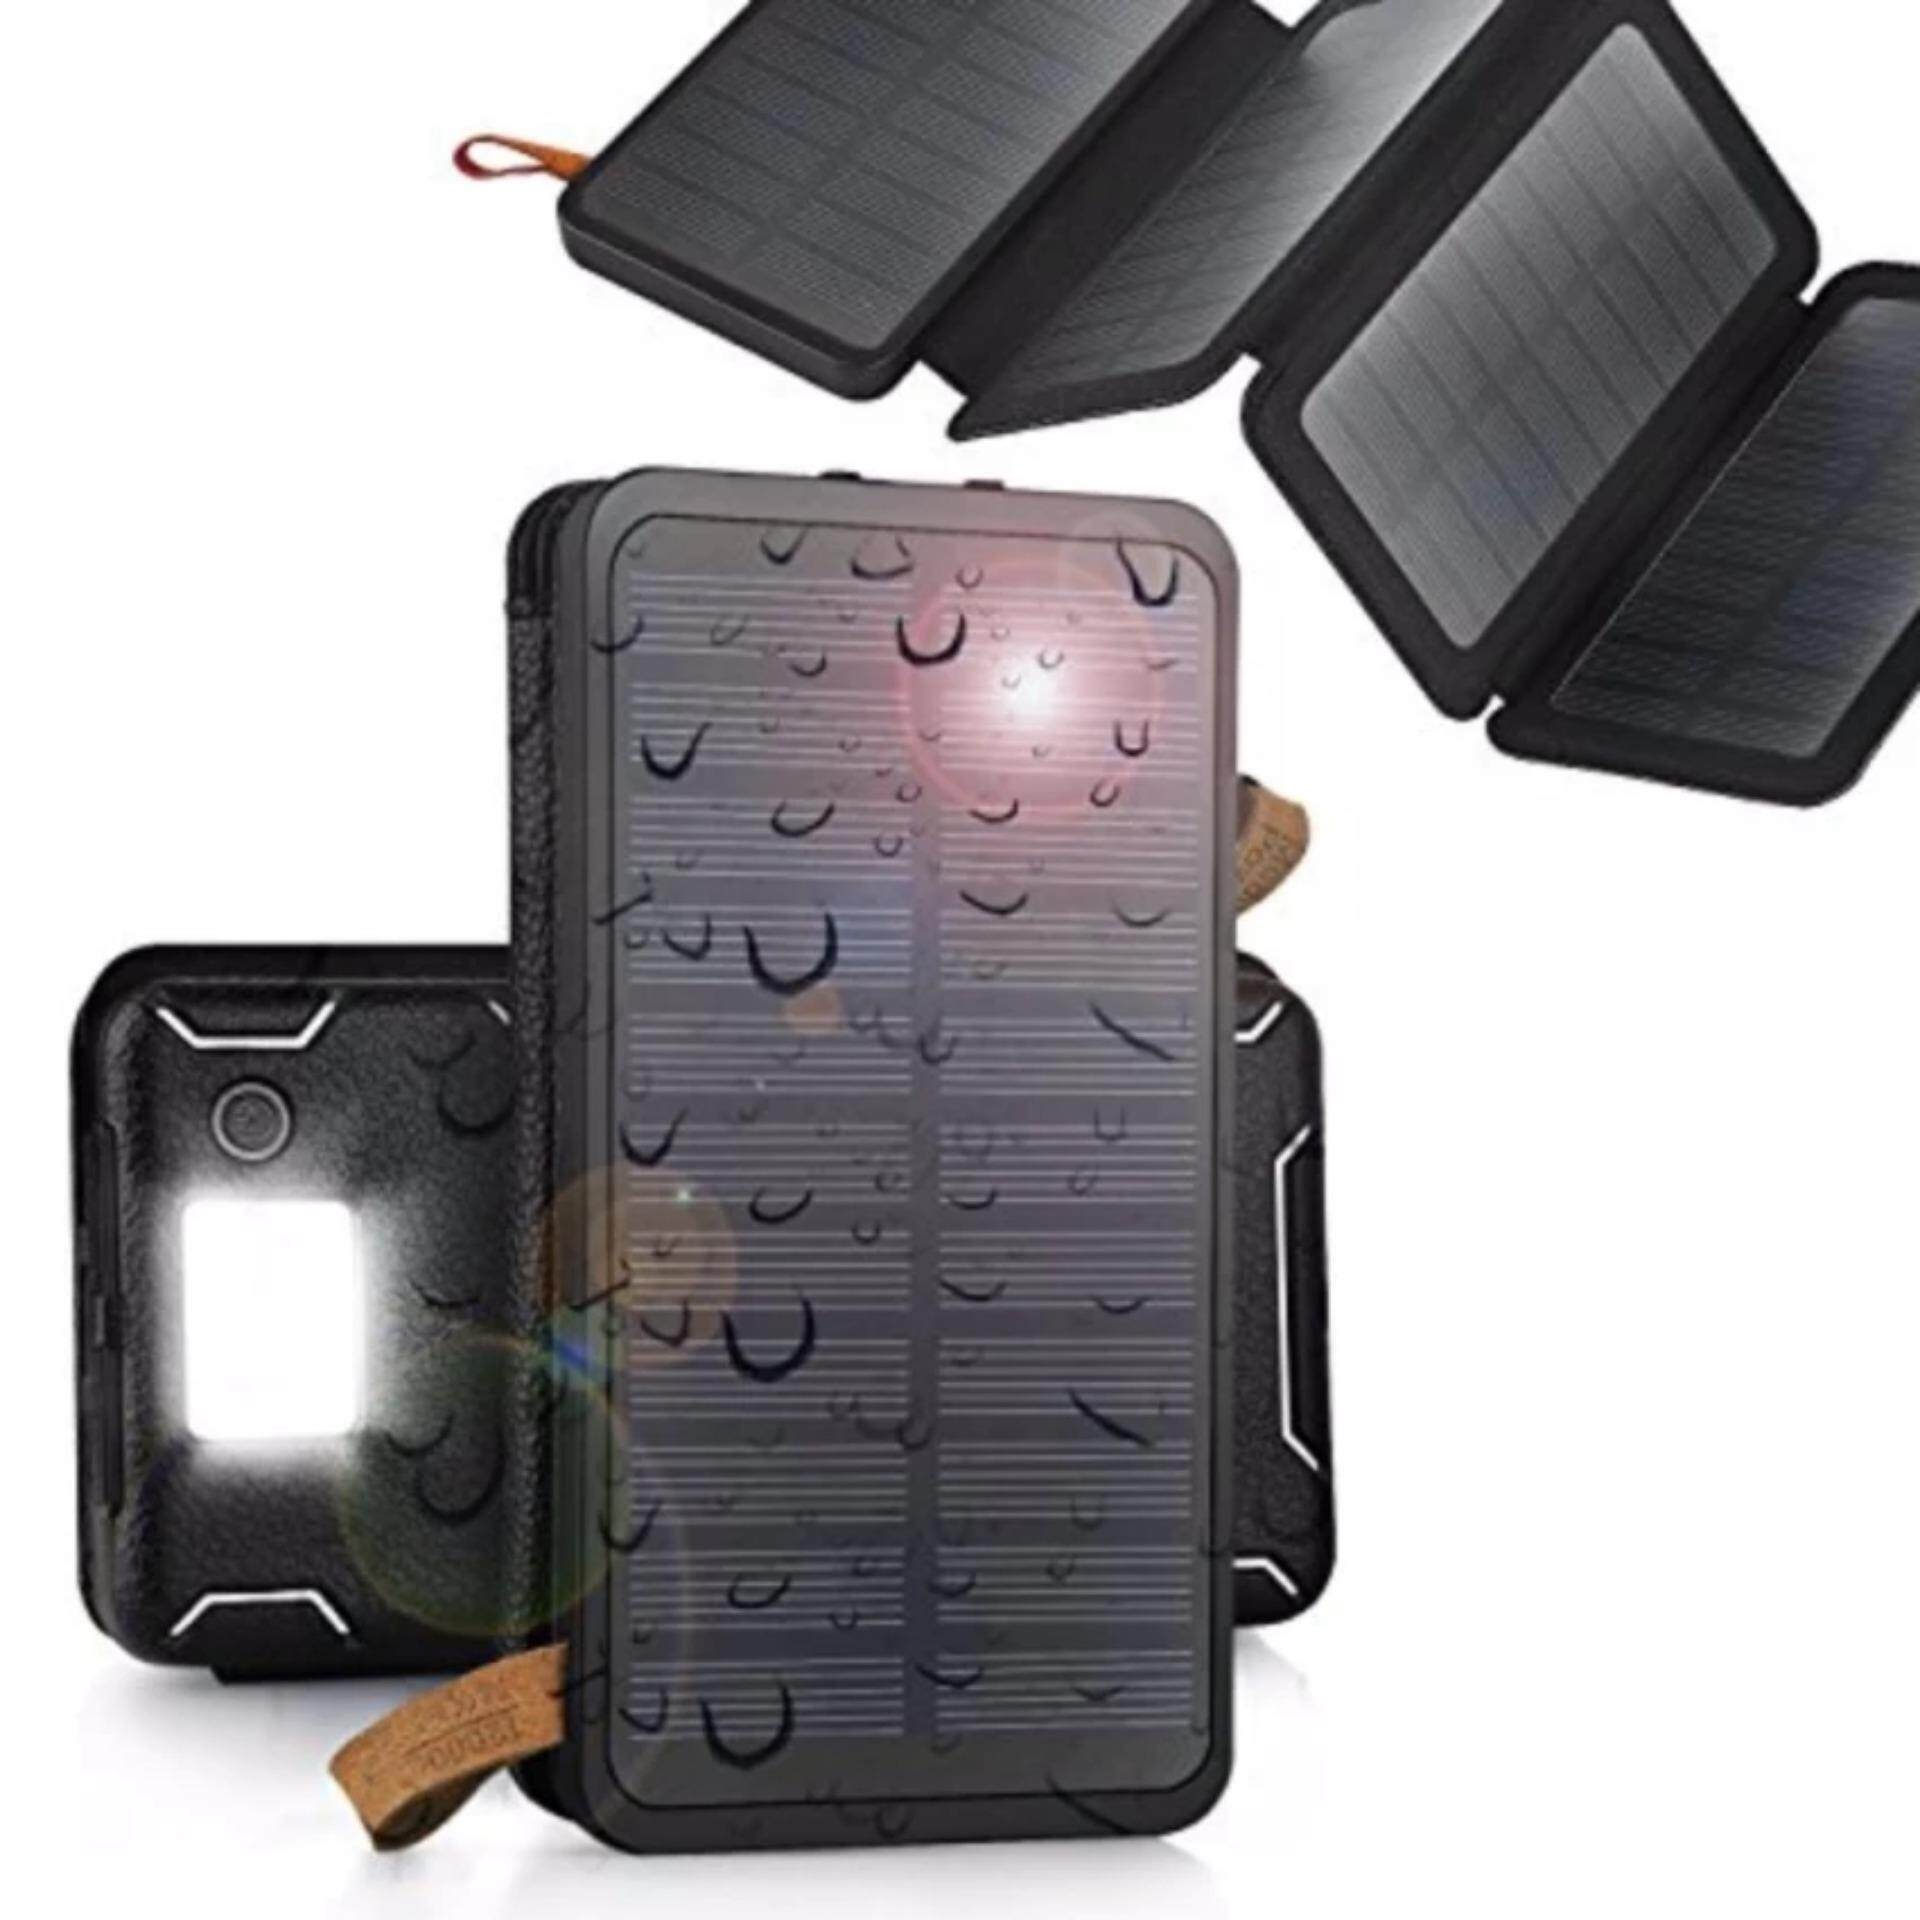 12000mAh Solar Charger, 4 Sunpower Panel Portable Solar Power Bank Waterproof&Dustproof Solar Battery Charger with Dual USB Emergency Led Flashlight for iPhone and Most Smart Phones Tablets  